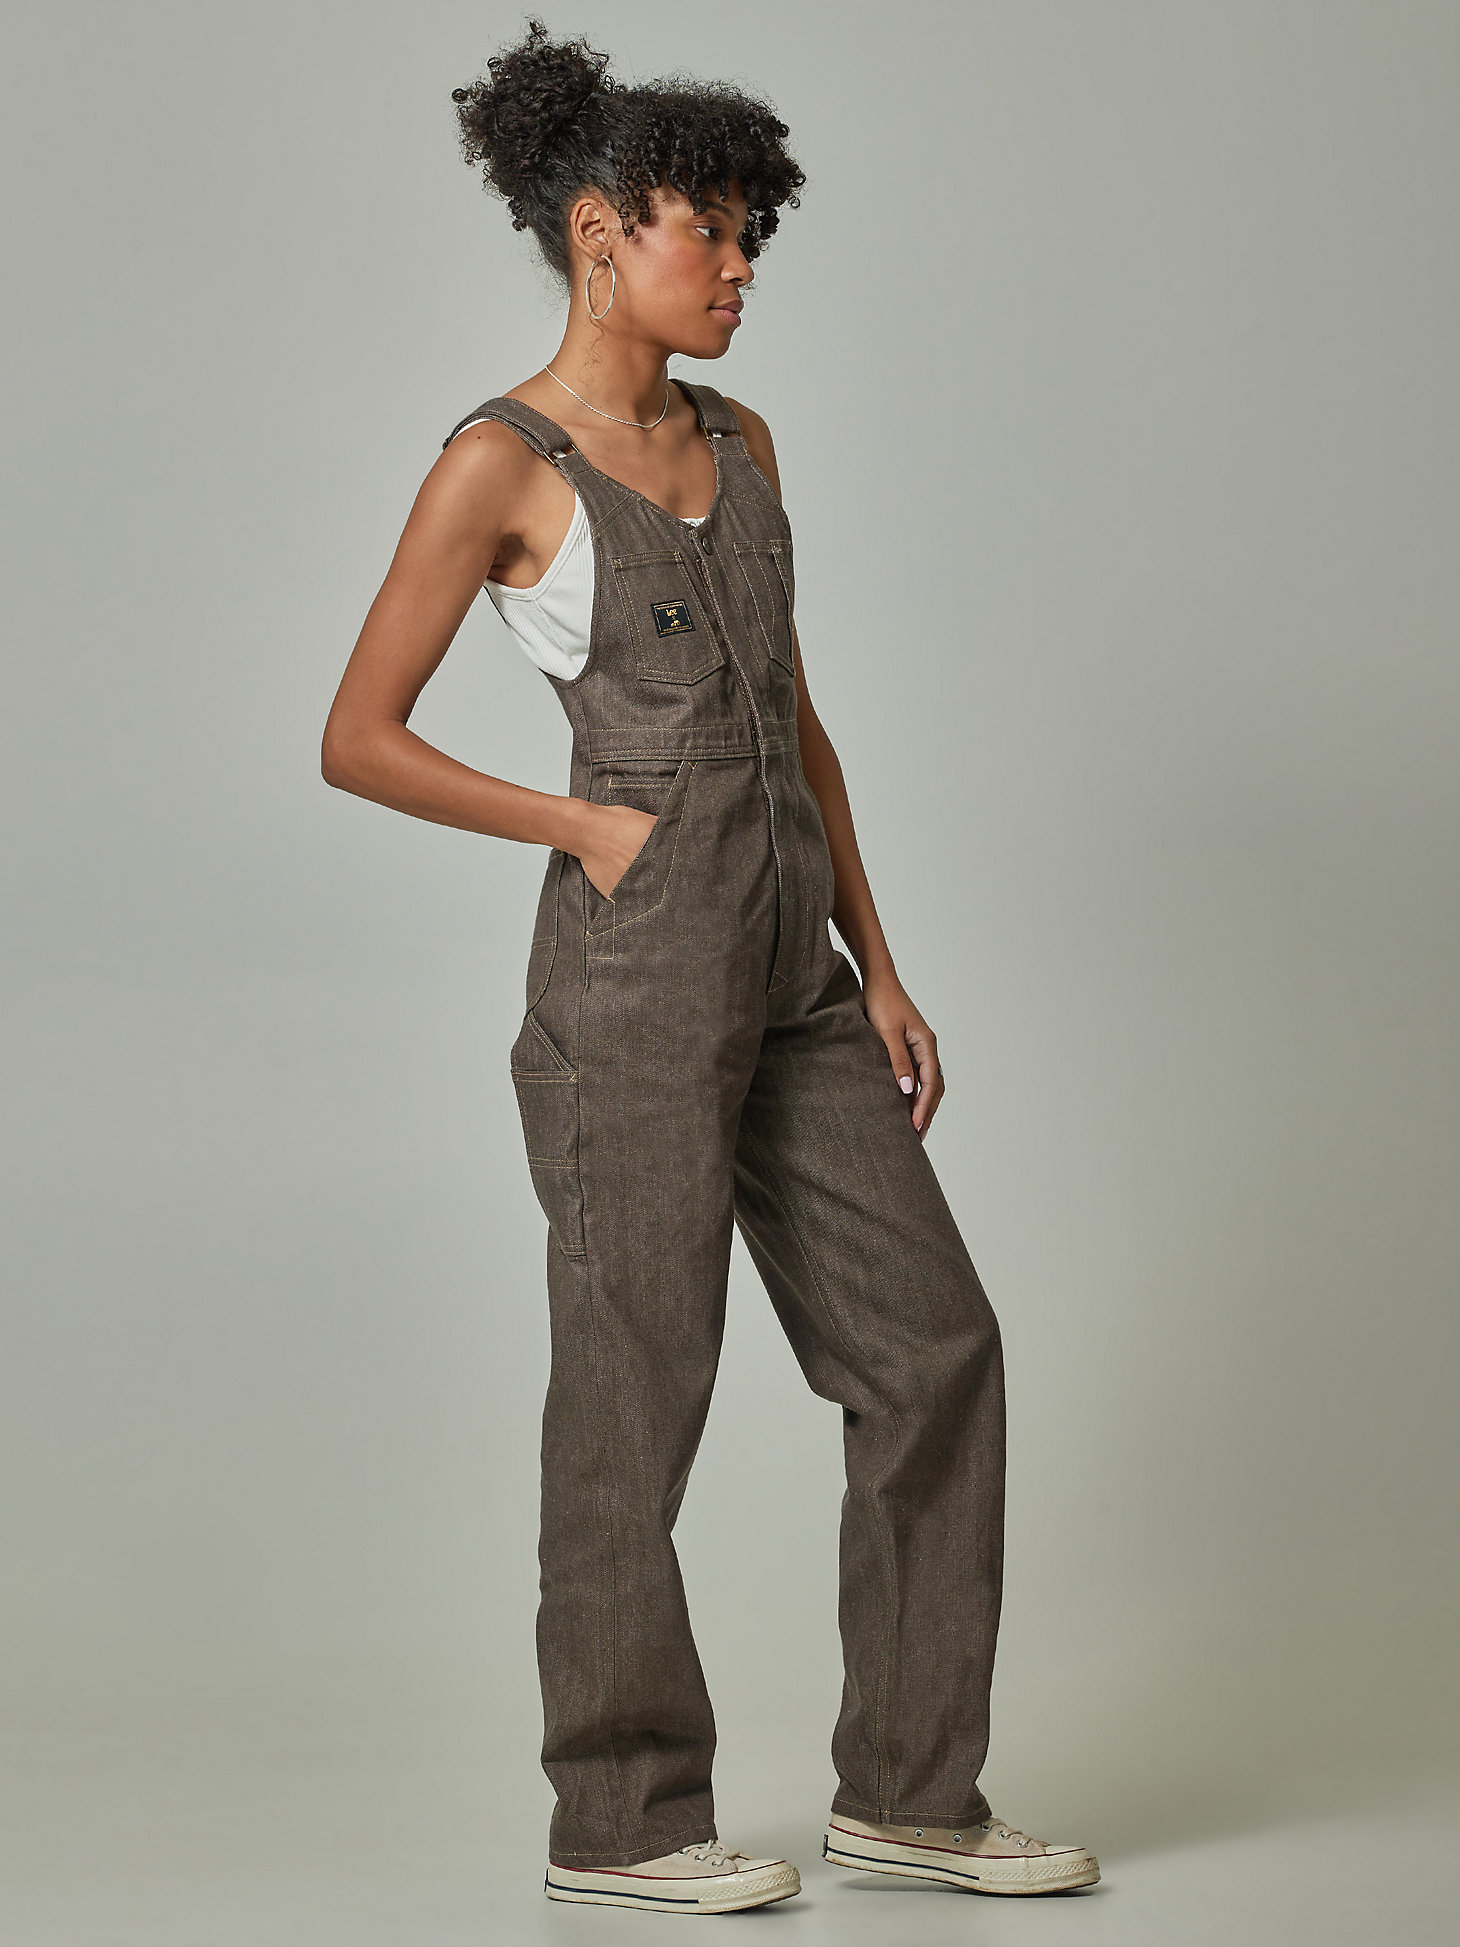 Women's Lee® x The Brooklyn Circus® Whizit Zip Bib Overall in Brown Selvedge alternative view 3